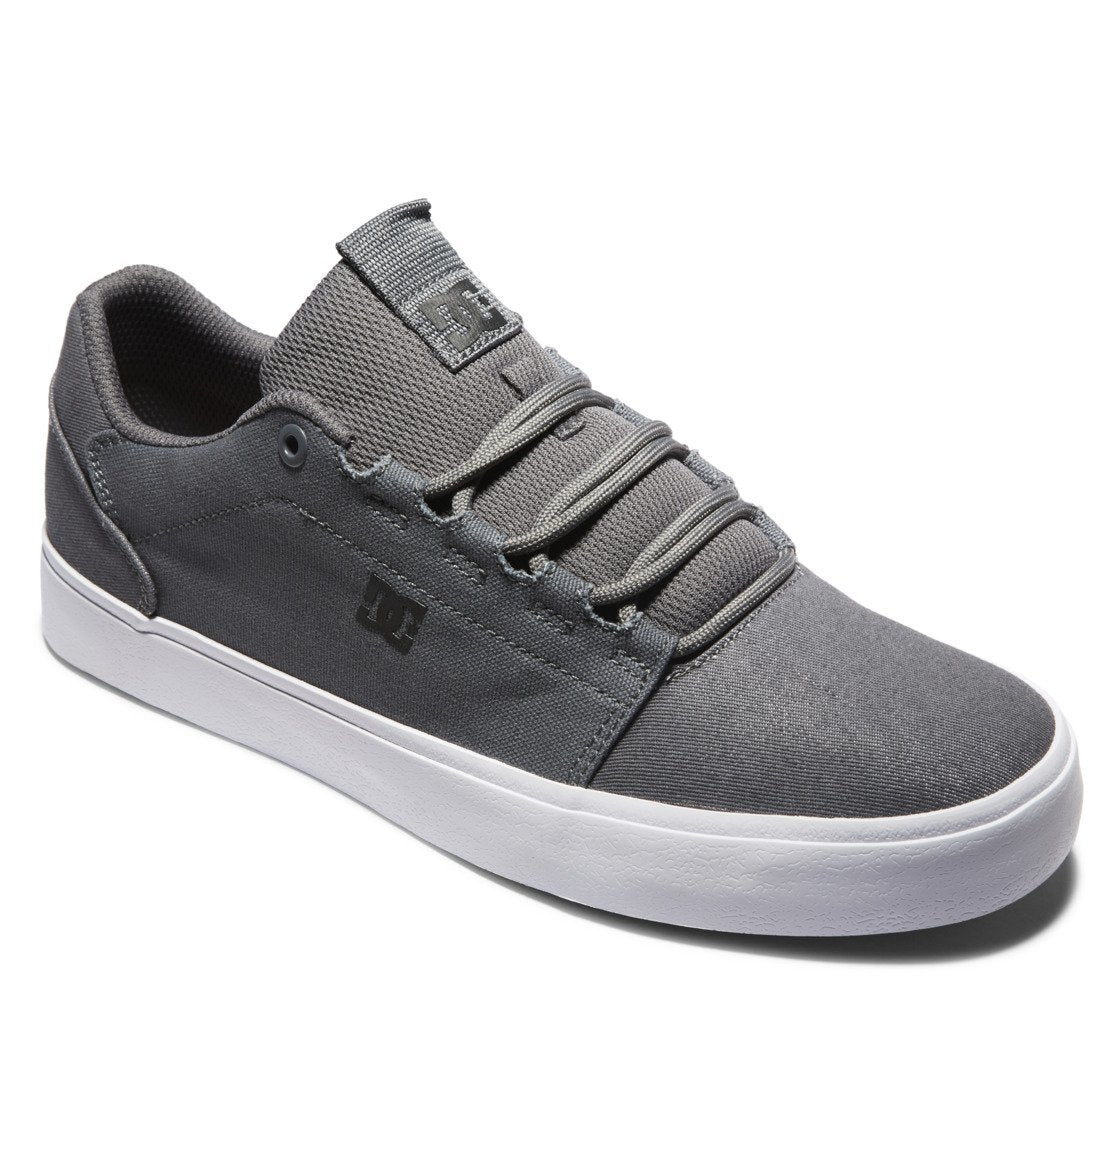 DC SHOES HYDE GREY TRAINERS